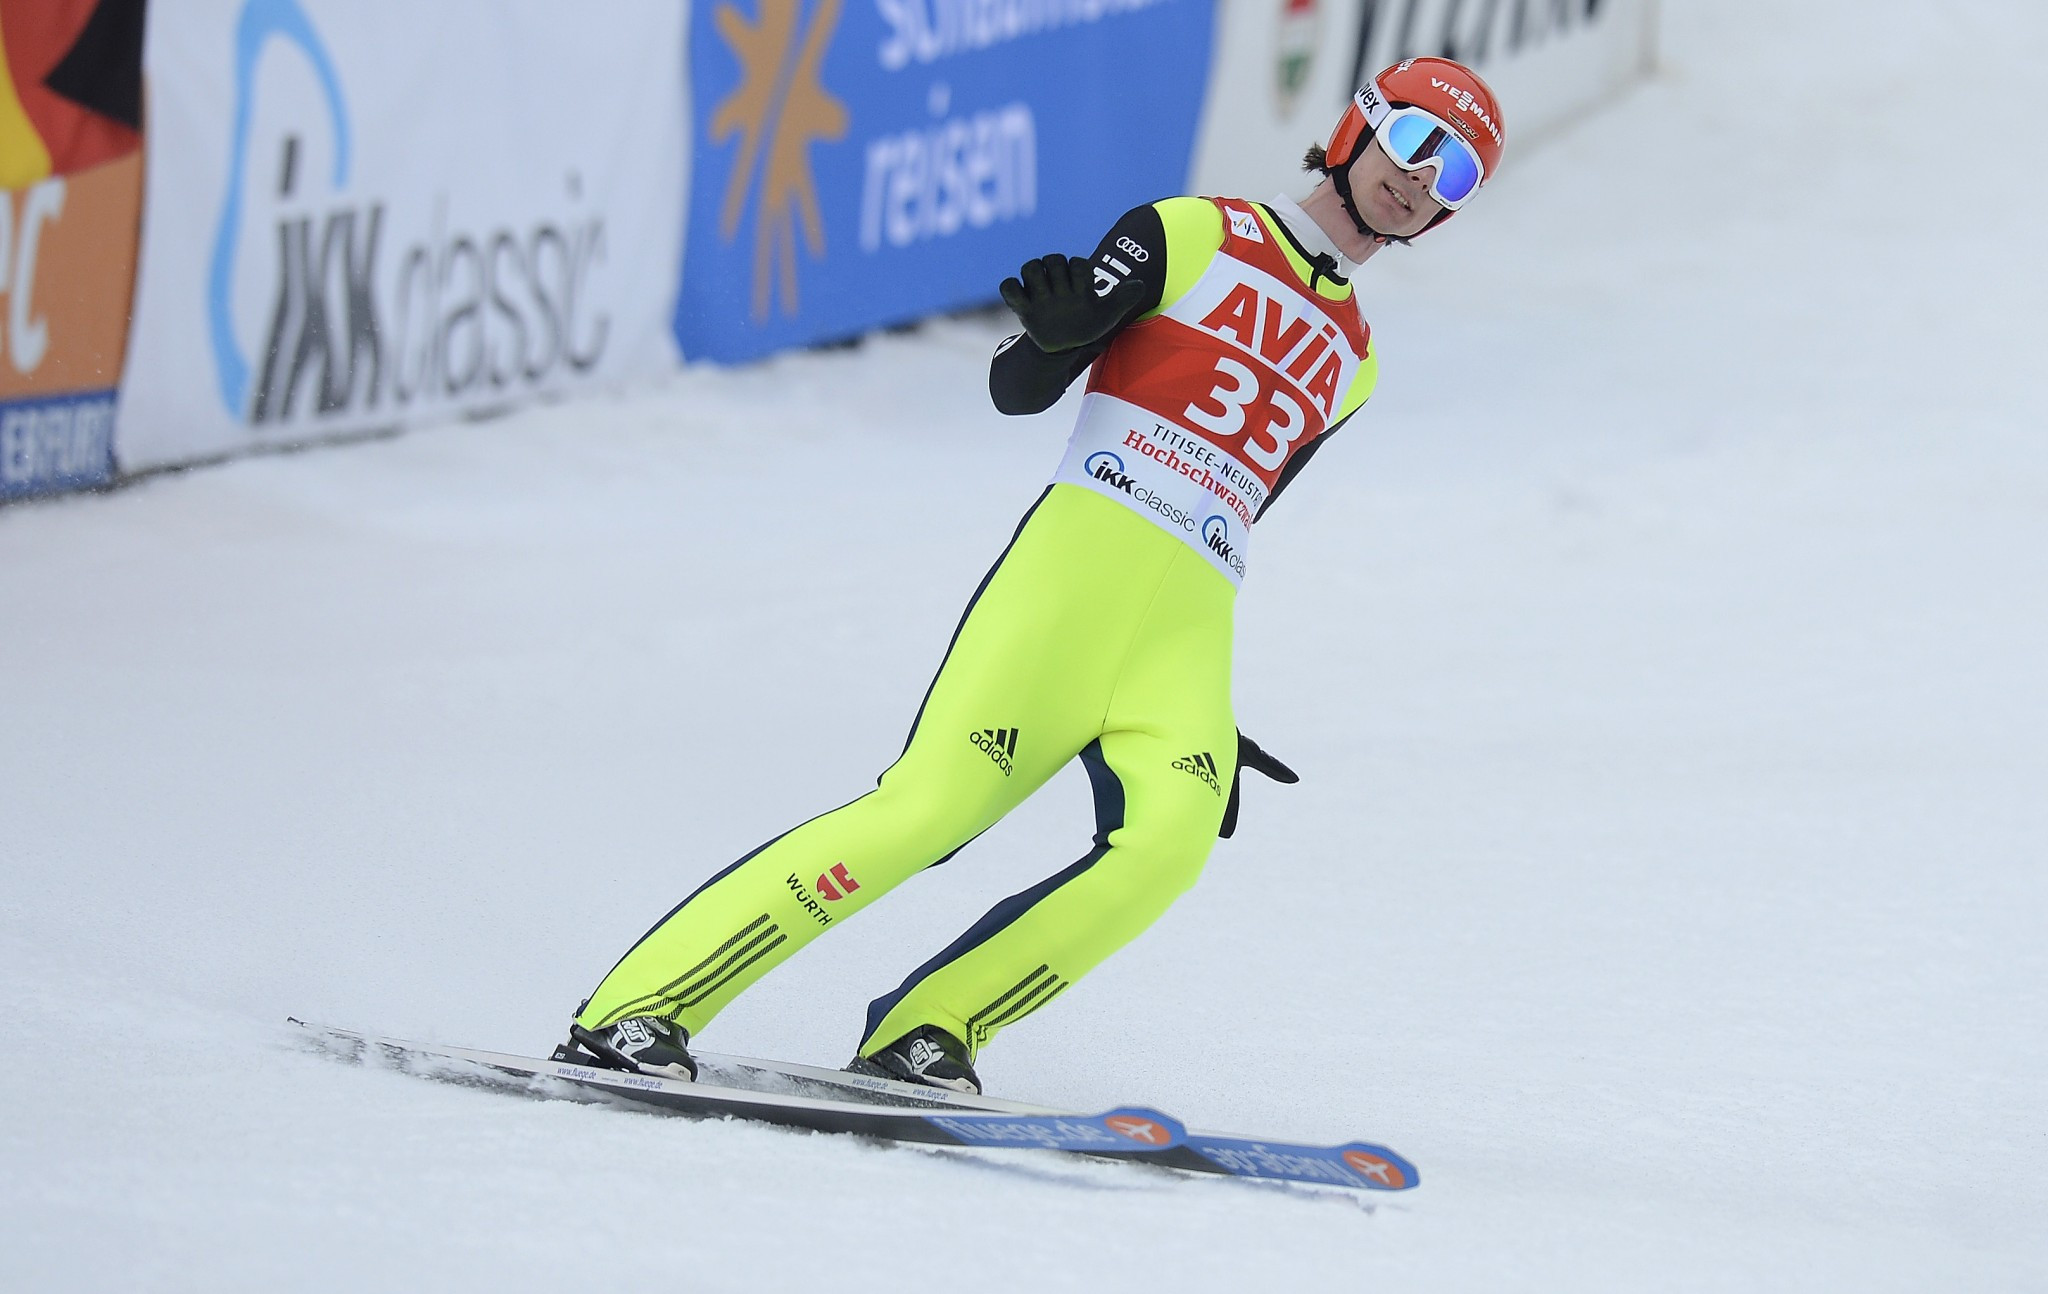 Olympic ski jumping champion hit with back injury